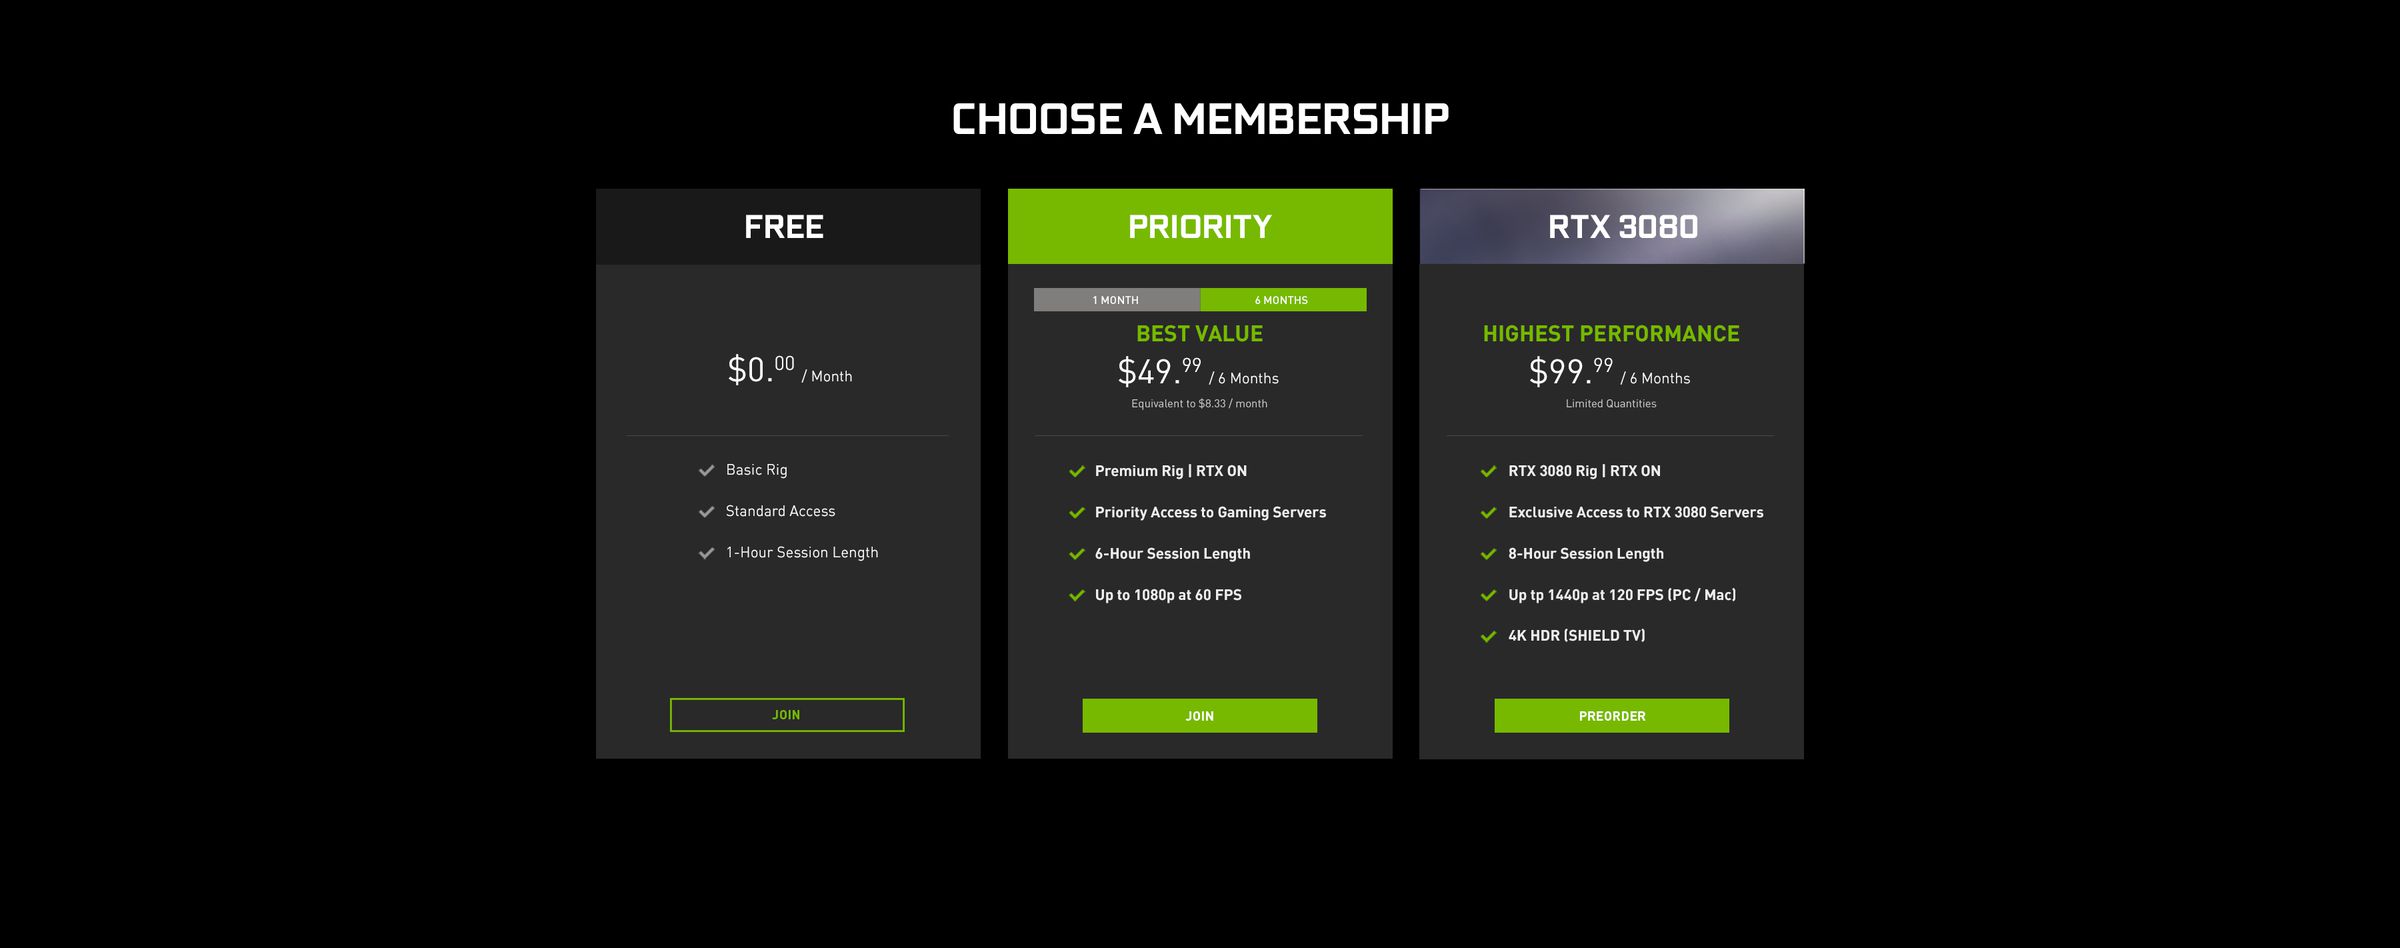 Pricing options for GeForce Now.